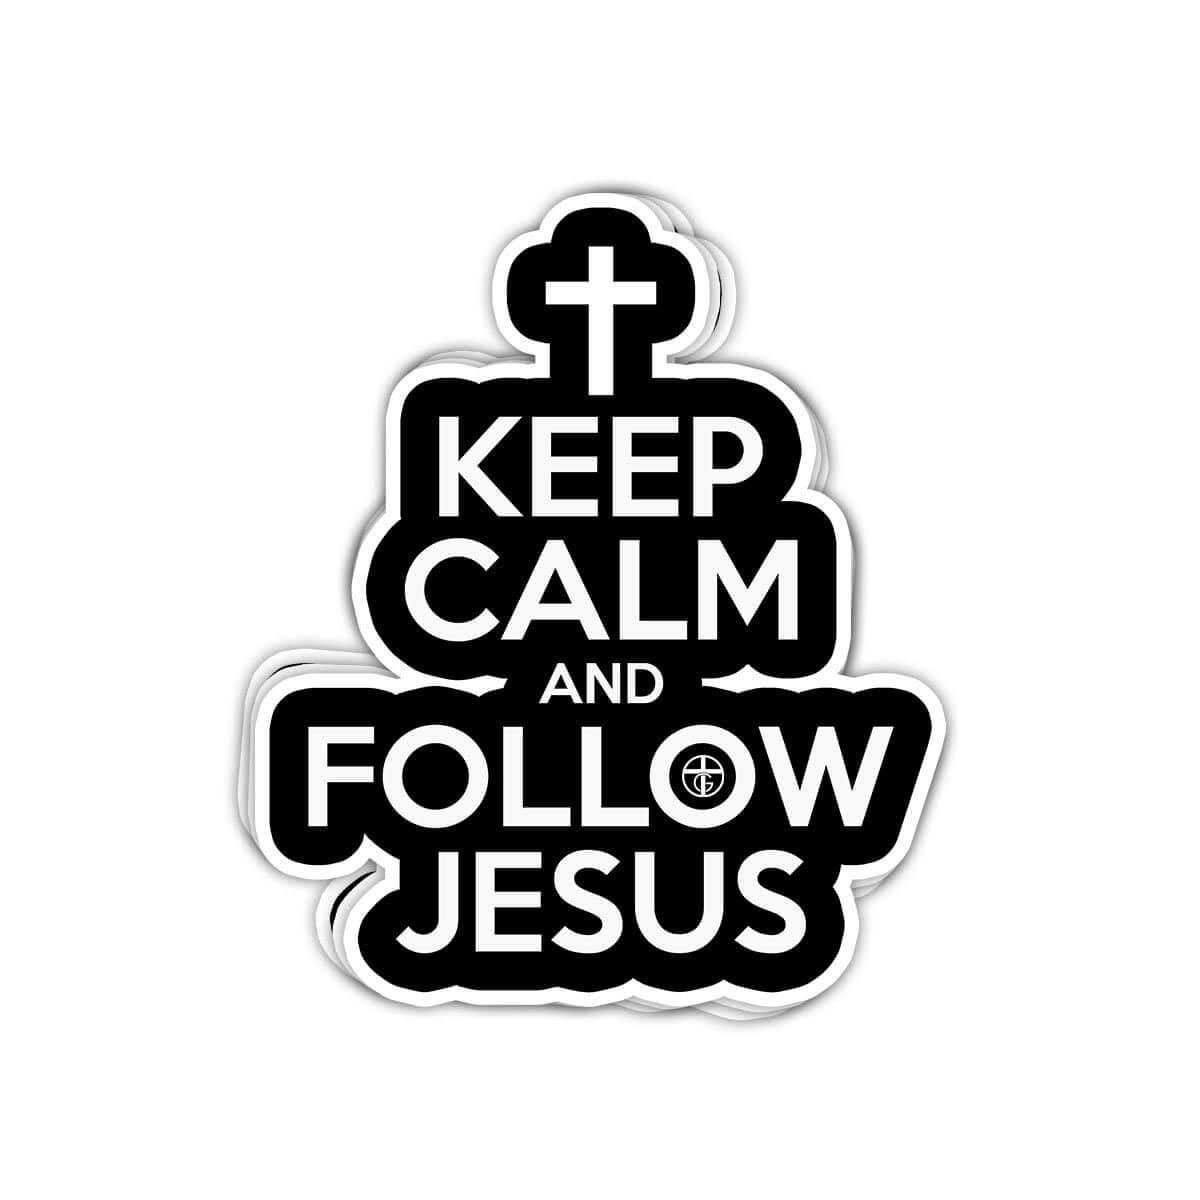 Keep Calm and Follow Jesus Decals - Our True God